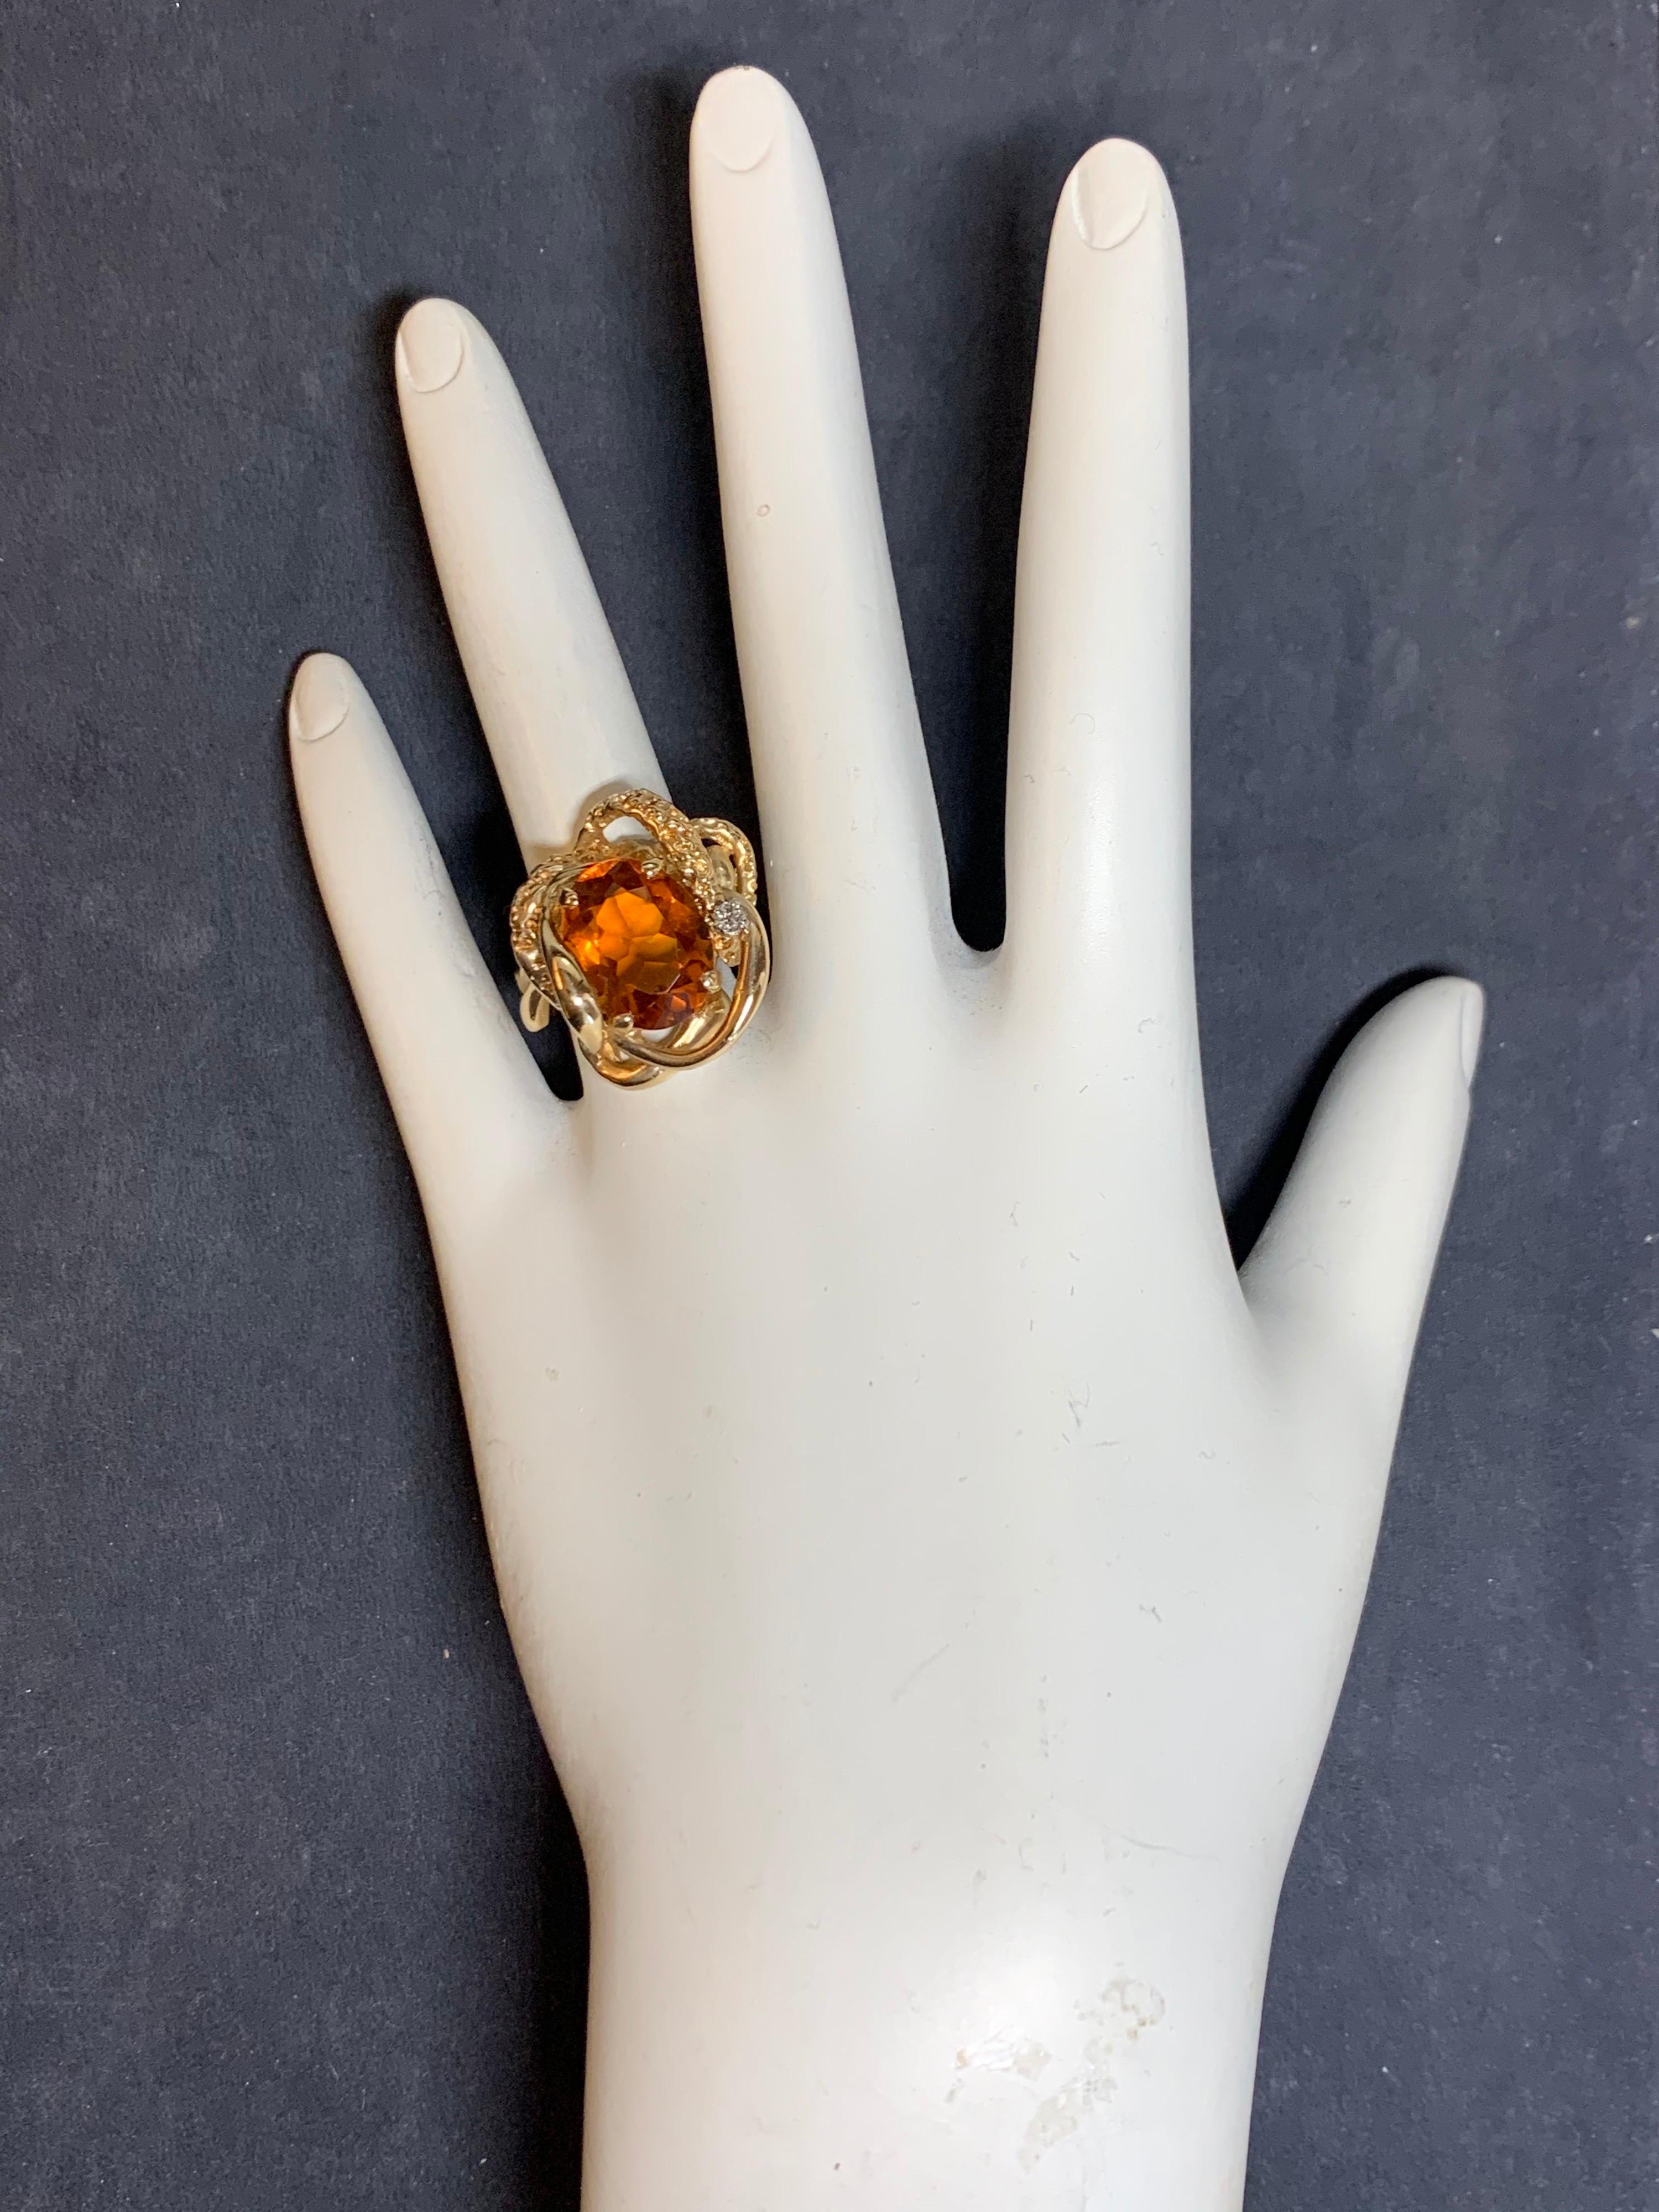 Retro 14k Yellow Gold Cocktail Ring set with approximately 5 Carats of Natural Citrine Quartz & Diamonds.

The center is a natural citrine quartz measuring 10.7x10.2x6.4mm and weighs approximately 5 carats. The ring weighs 11 grams and is a size 6.